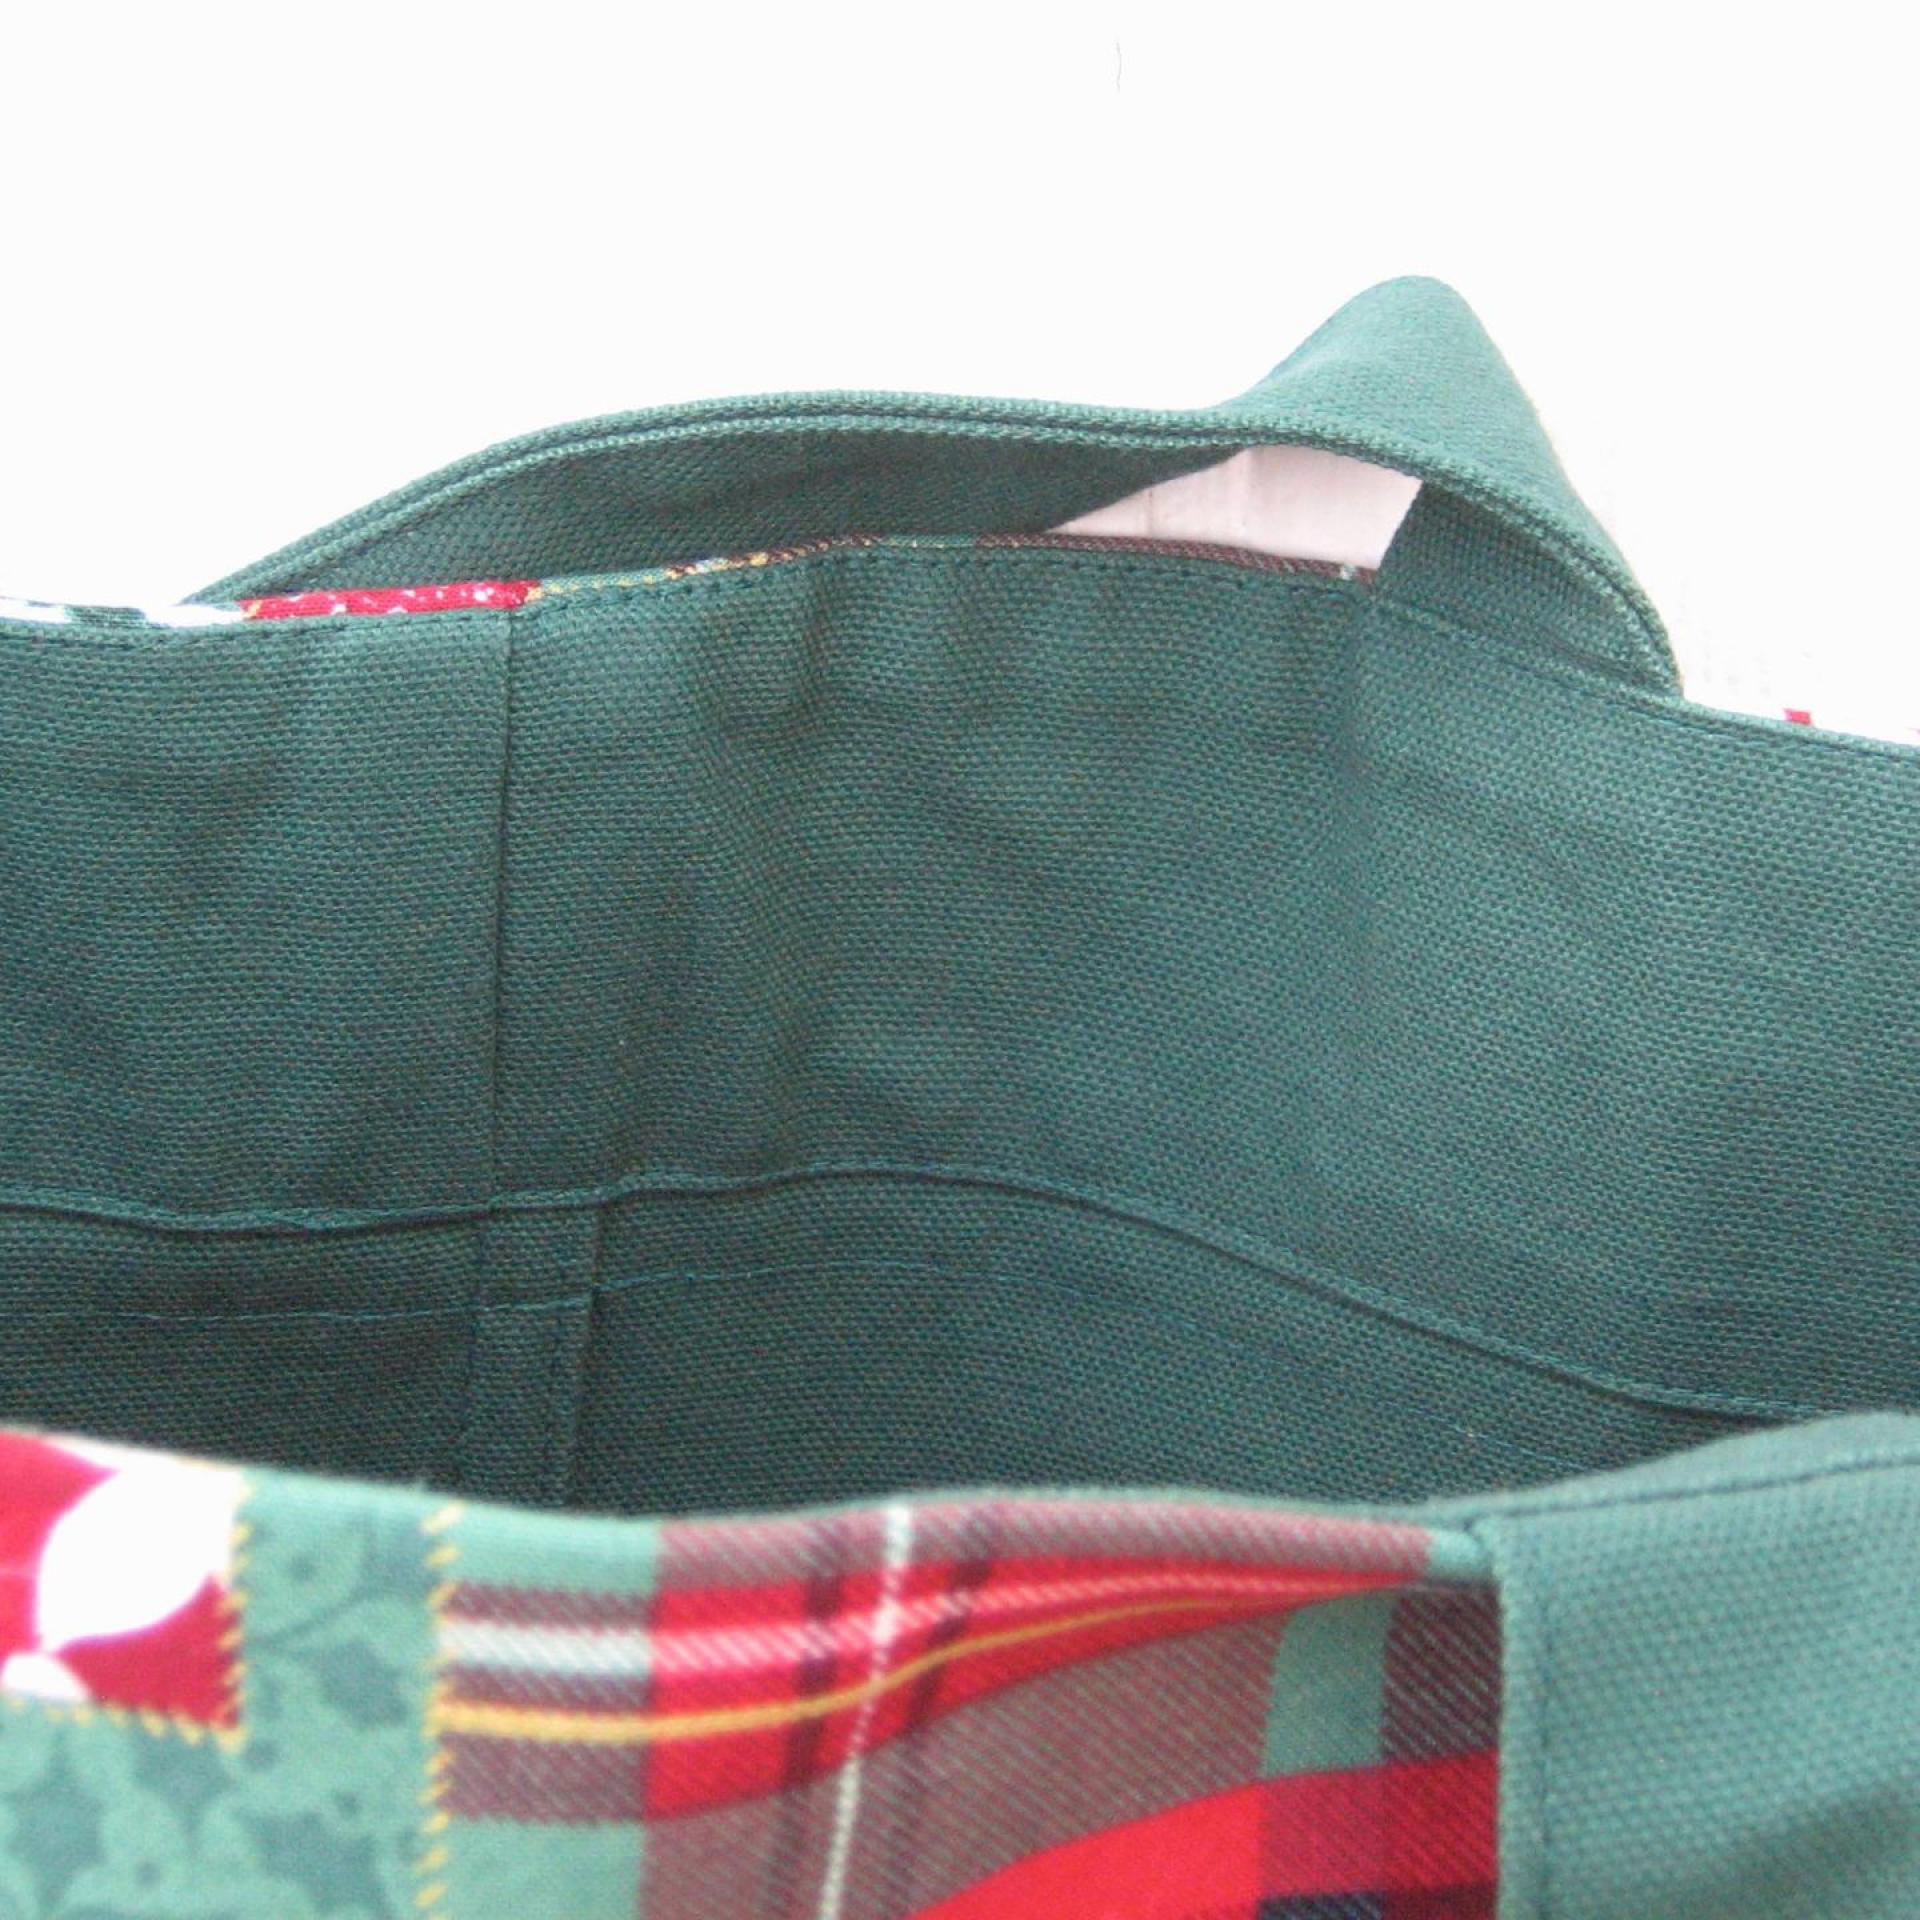 Green Canvas Shopping Bag, Red, Green, White Christmas Plaid Patchwork, Reusable Duck Cloth Tote, USA Handmade